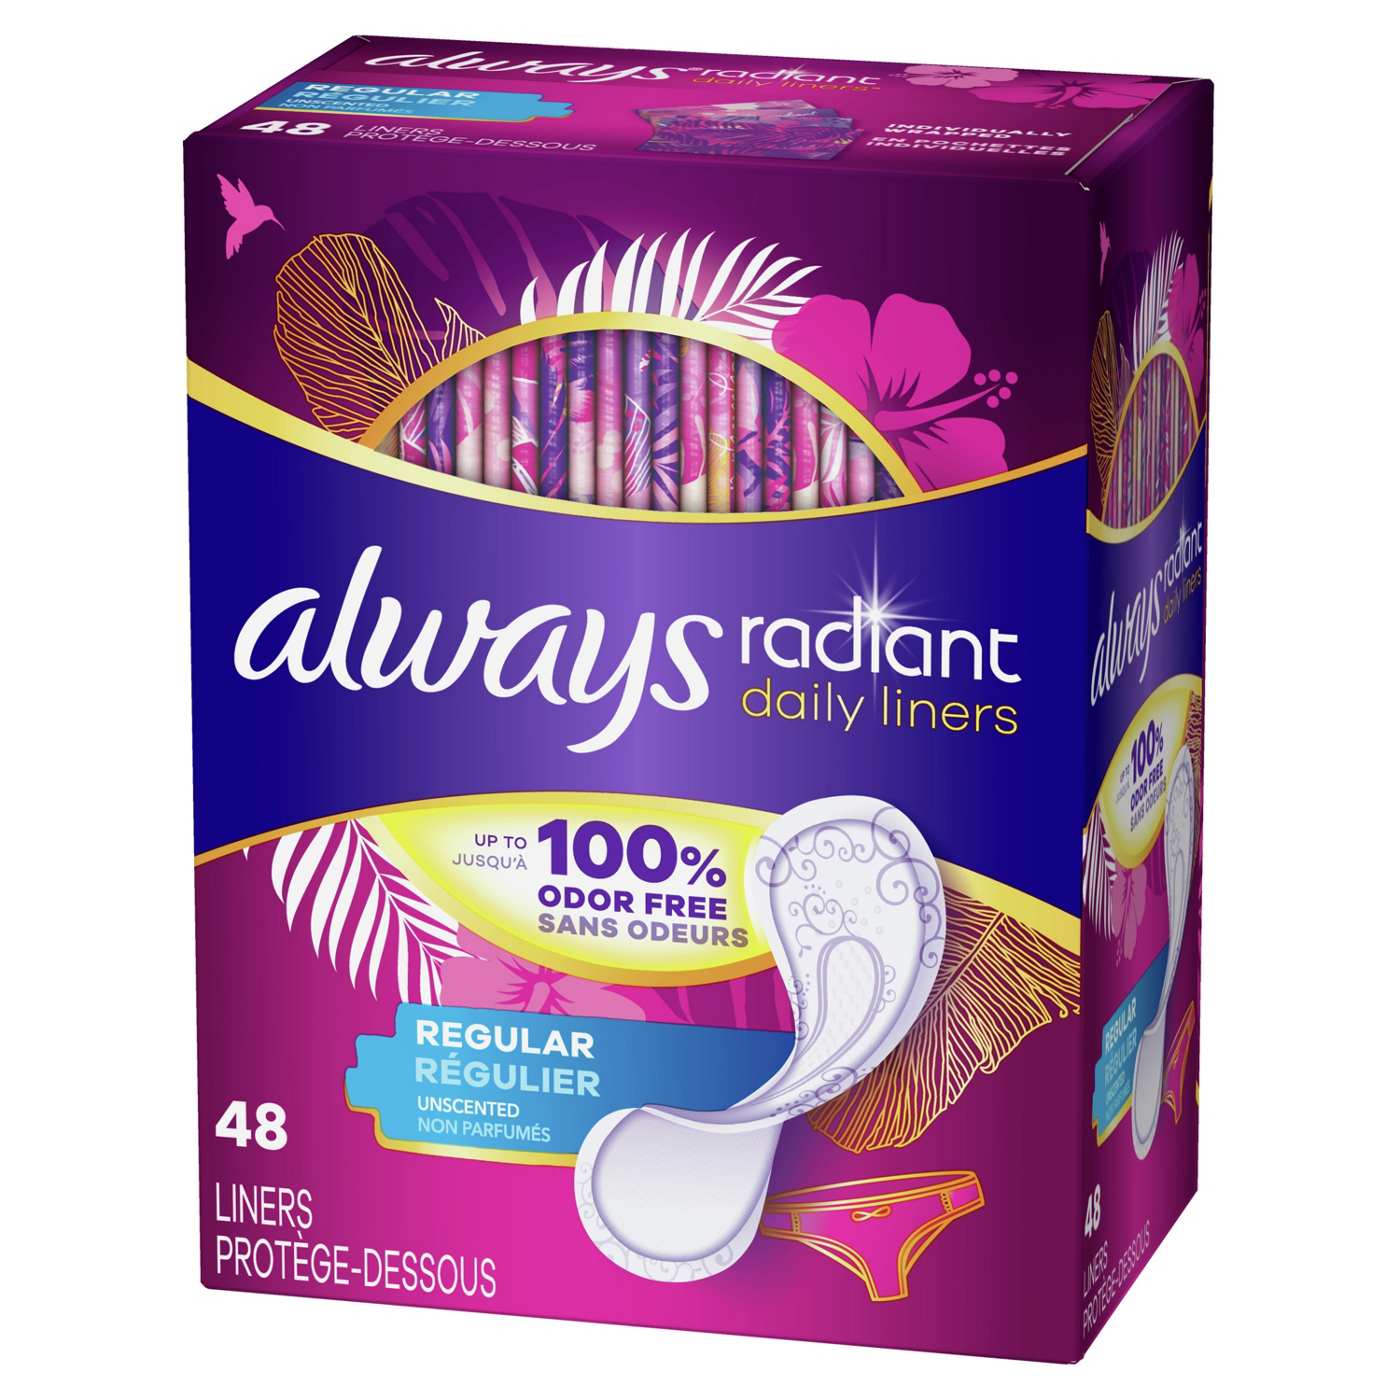 Always Radiant Daily Liners Regular  Unscented; image 4 of 7